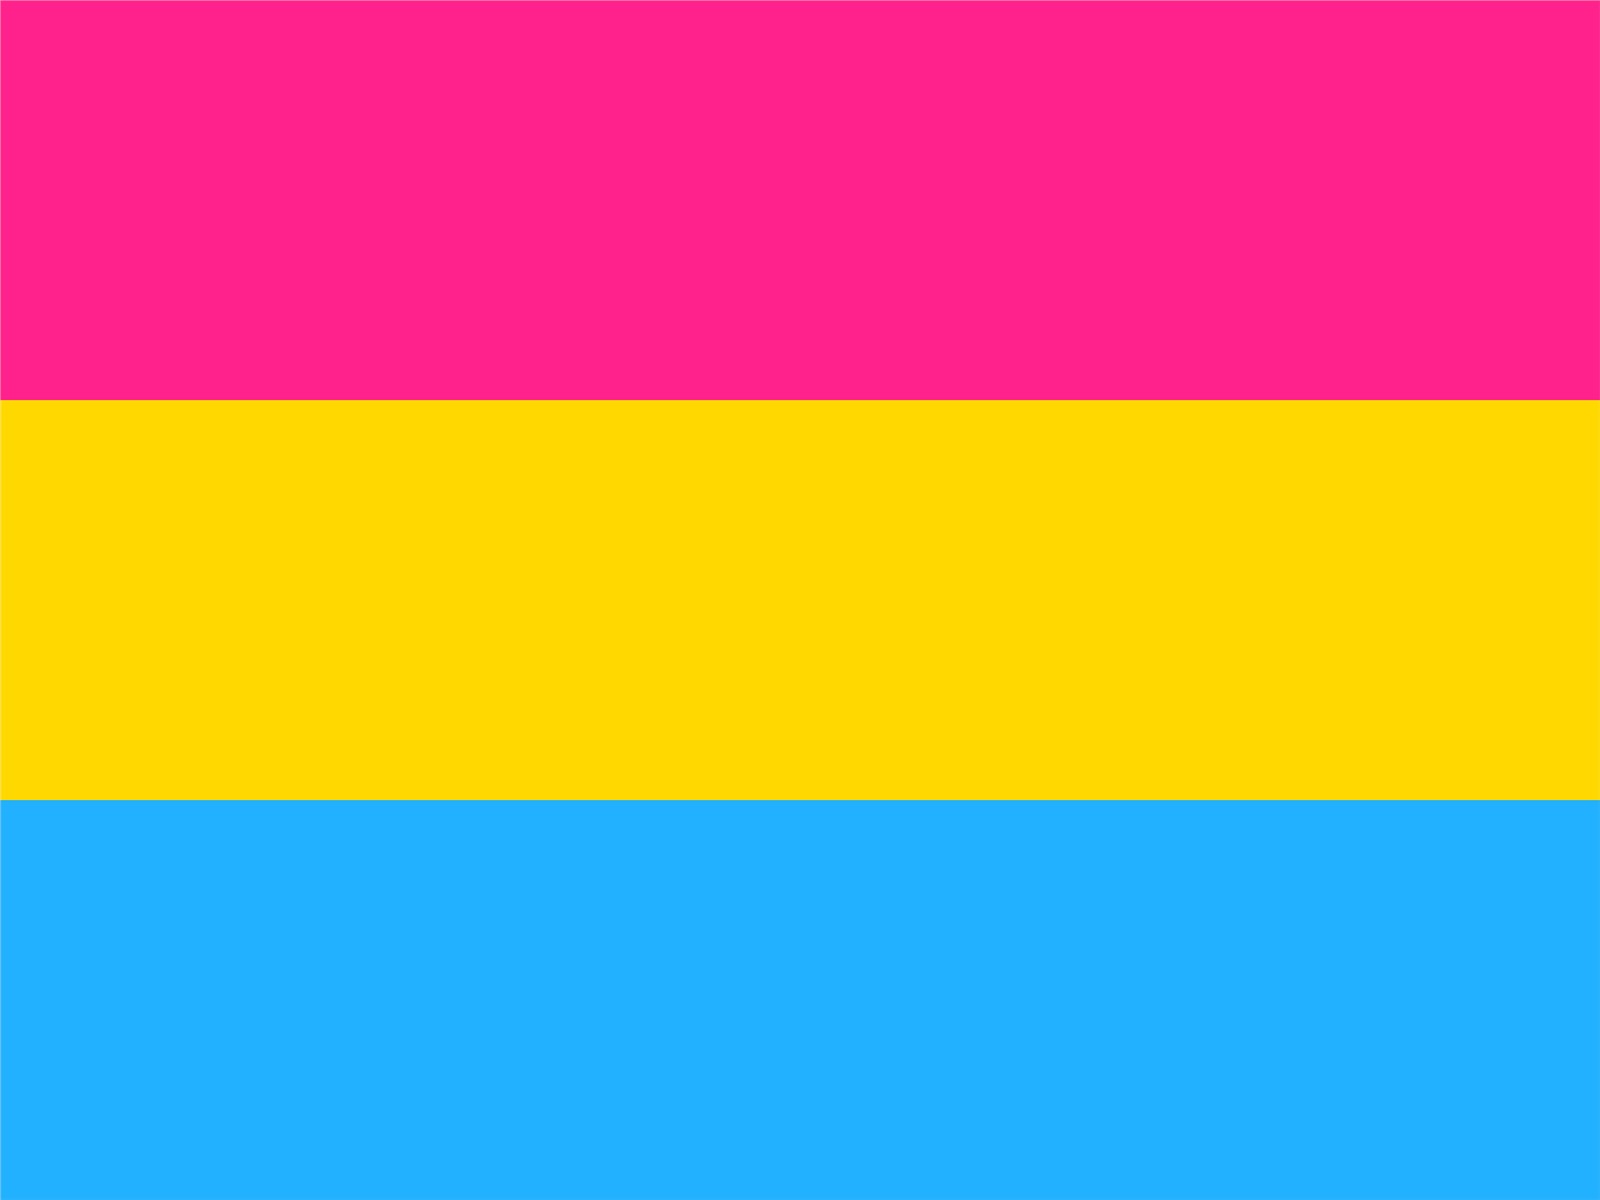 Pansexual Flag Ft X Ft High Quality Flags Rainbow Gay Pride Lgbt